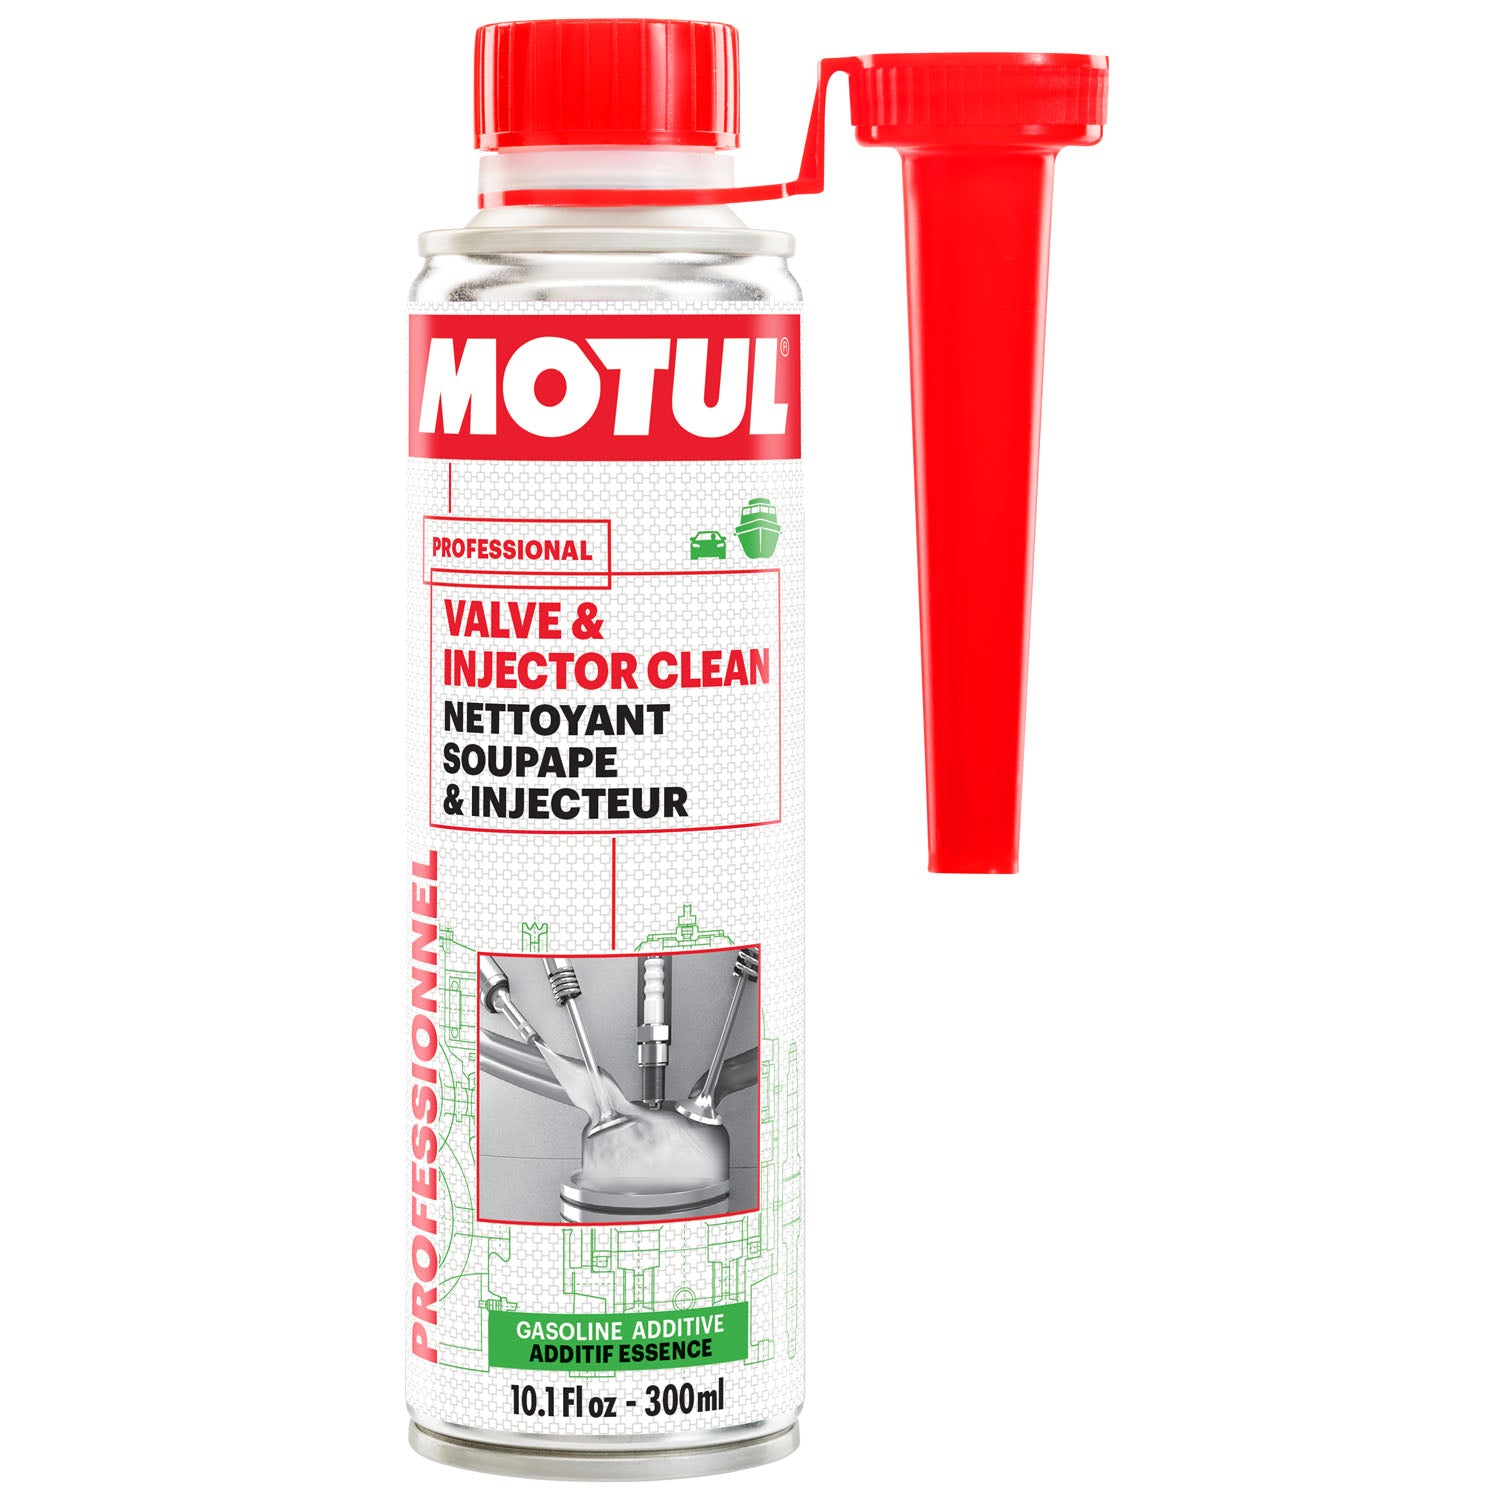 Motul Professional Valve and Injector Clean Gasoline Additive - 300ml